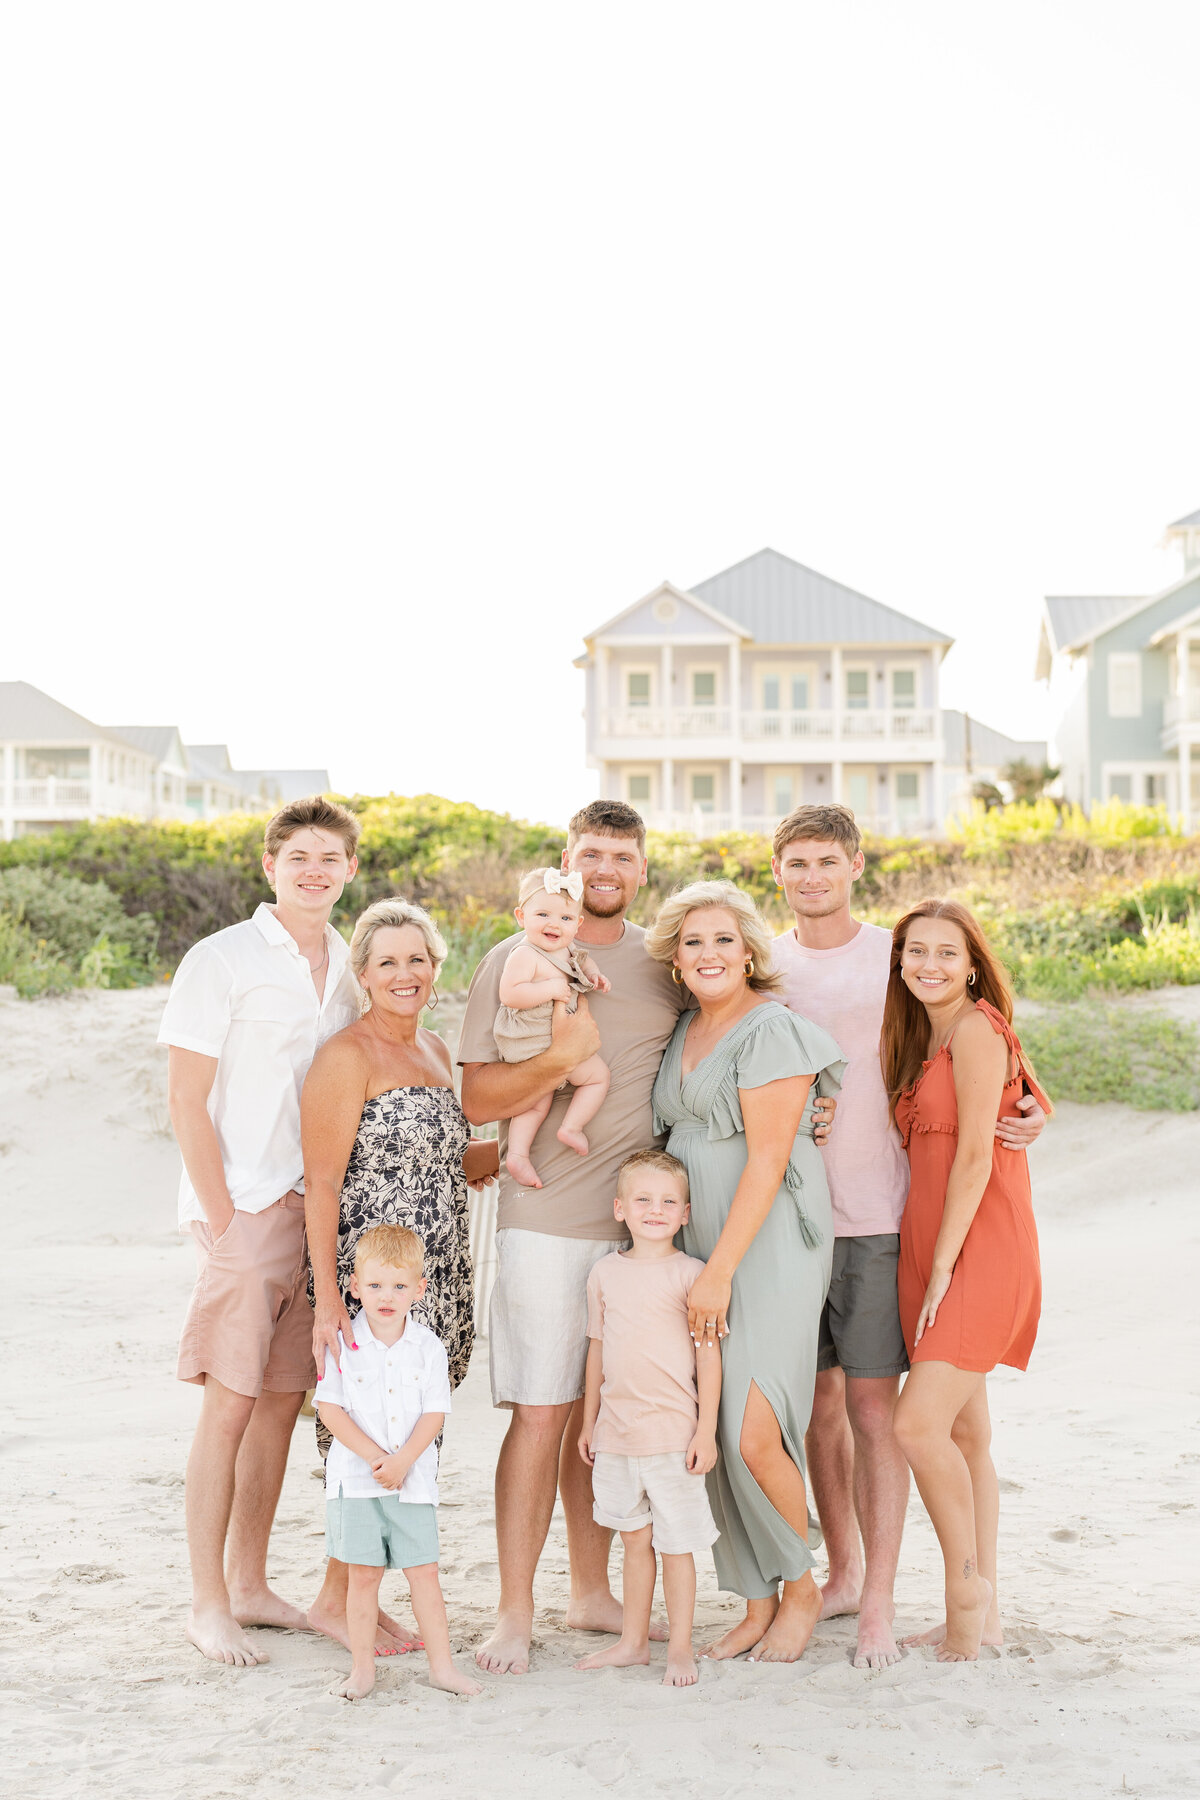 Large extended family smiling at camera  on beach in front of sand dunes with homes in the background